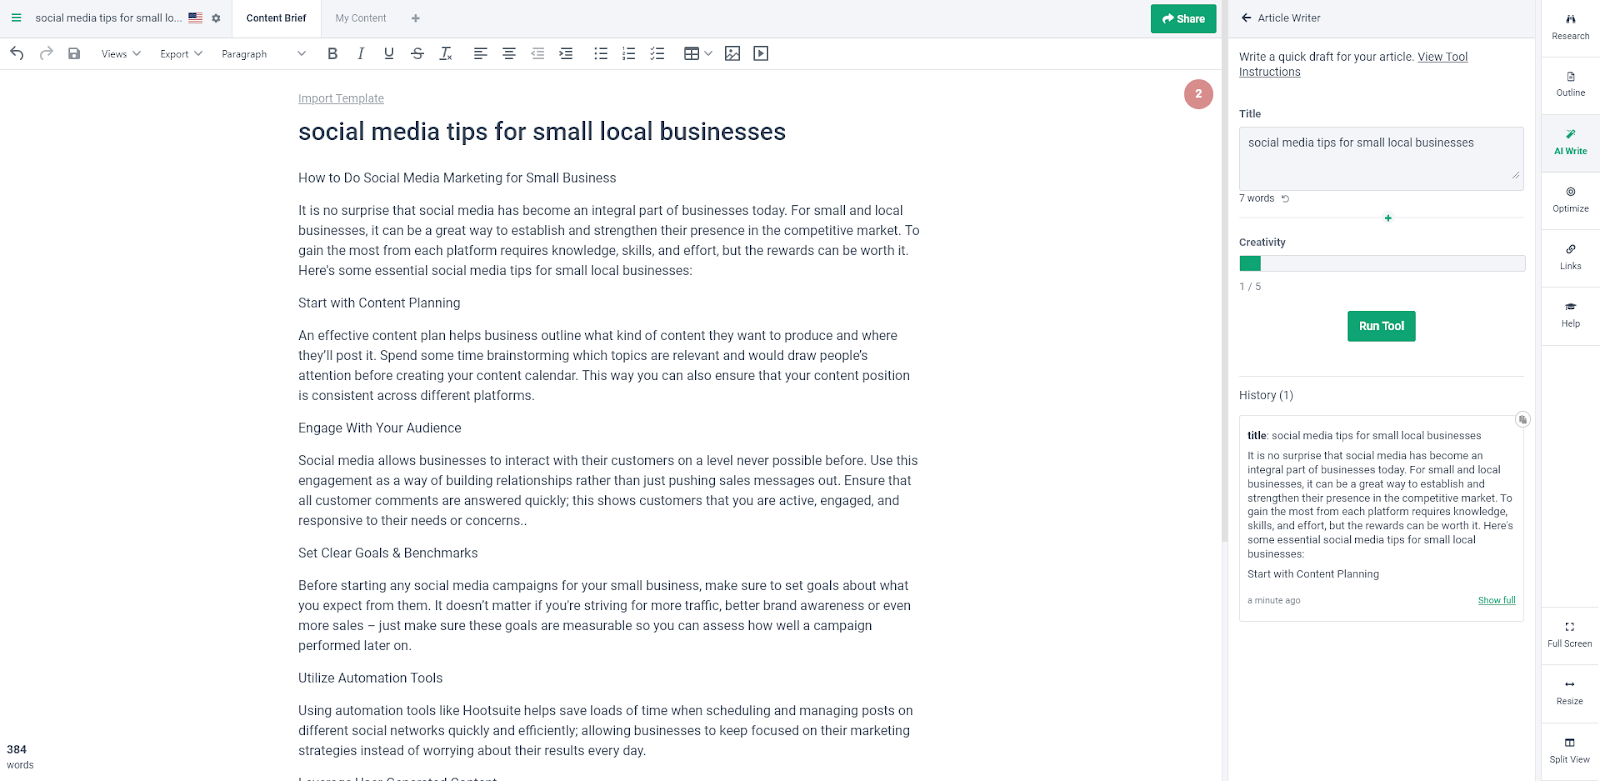 AI SEO tool Frase. The screenshot shows an article being drafted by Frase, on the topic Social Media Tips for Small Local Businesses.